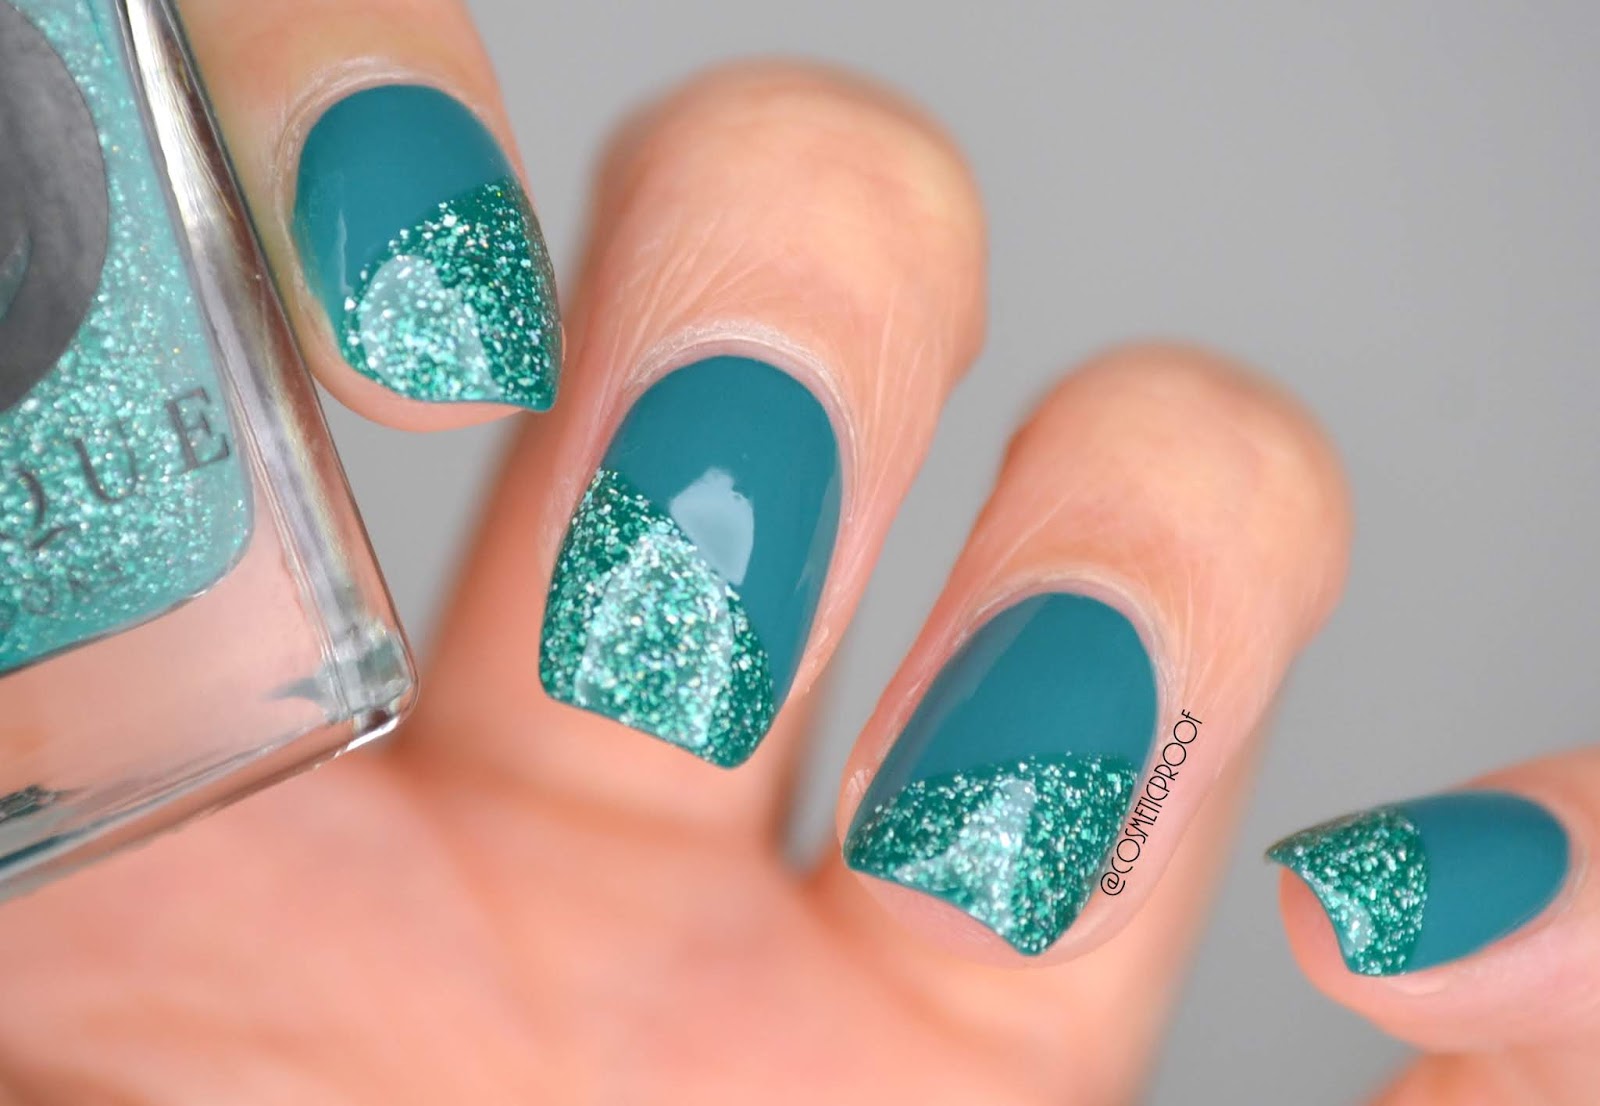 Teal and Glitter Nail Designs - wide 5